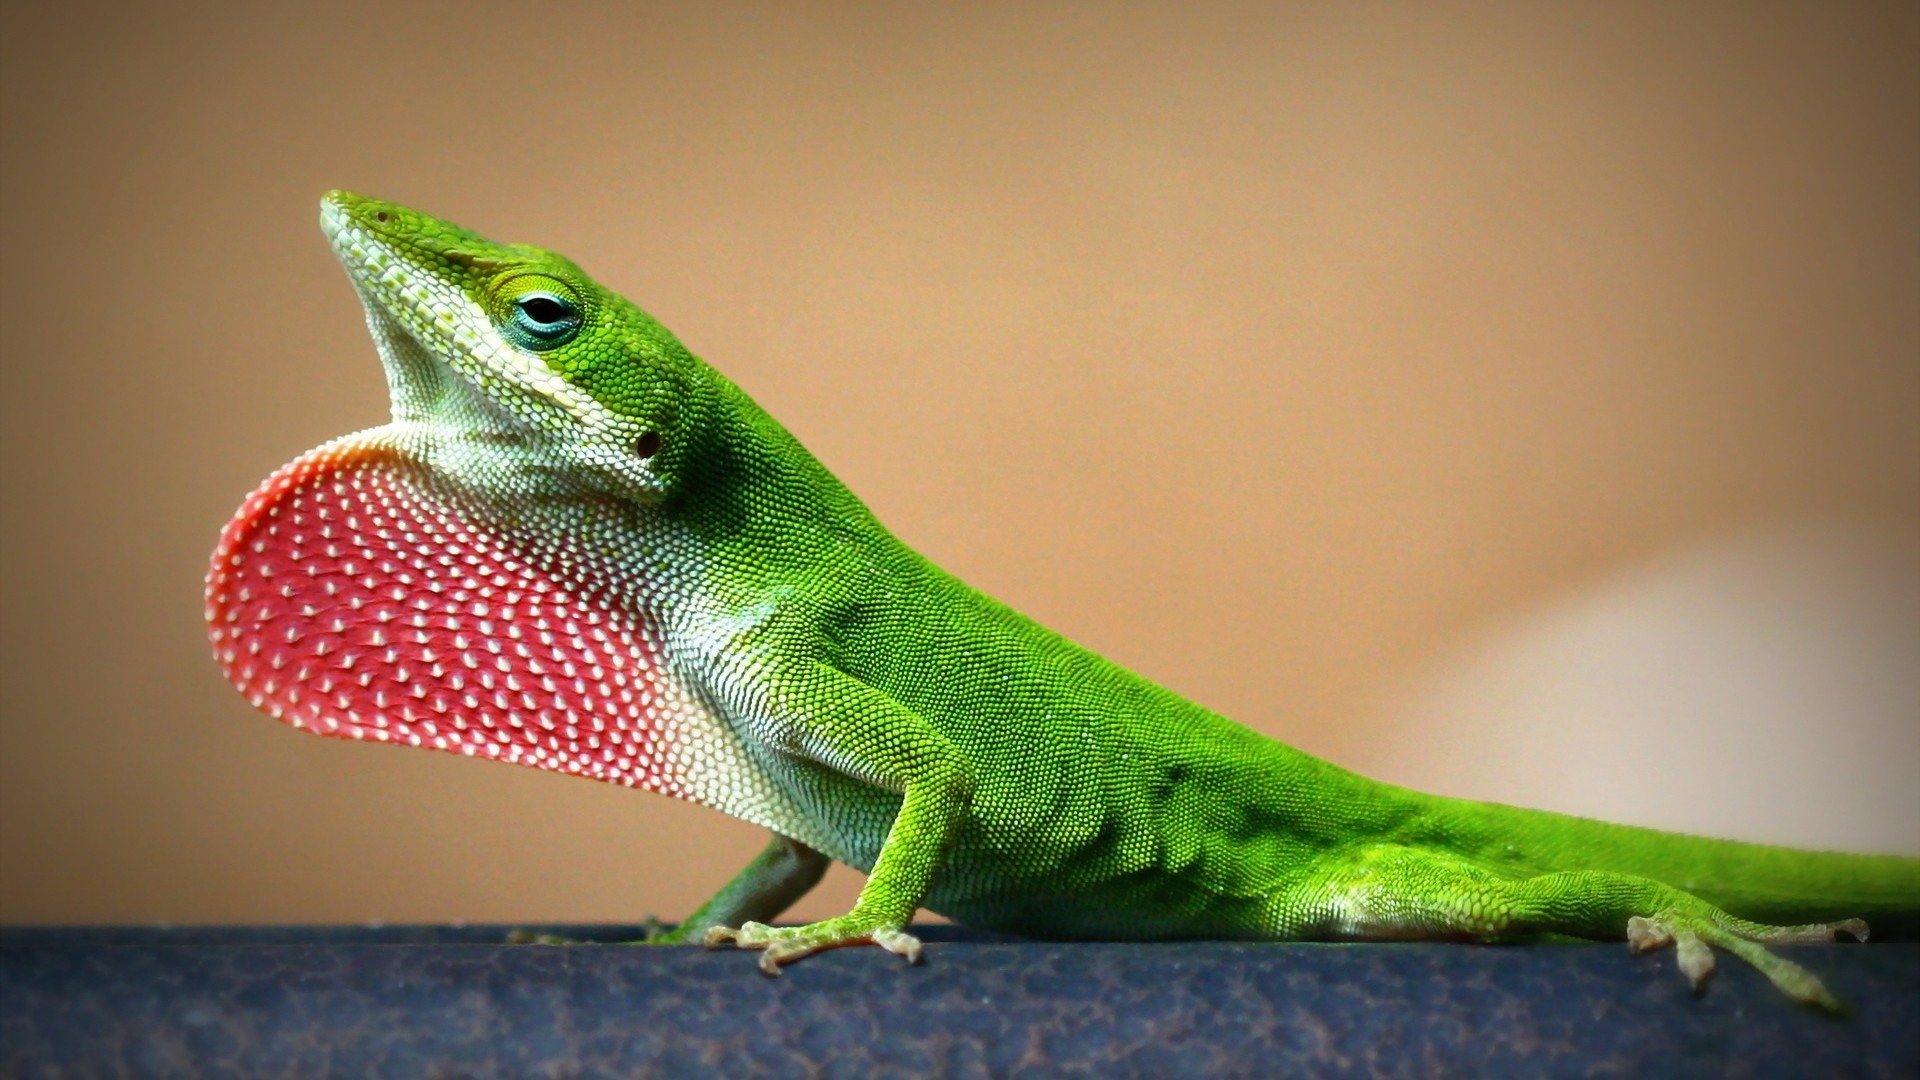 Young Lizard for 1920 x 1080 HDTV 1080p resolution